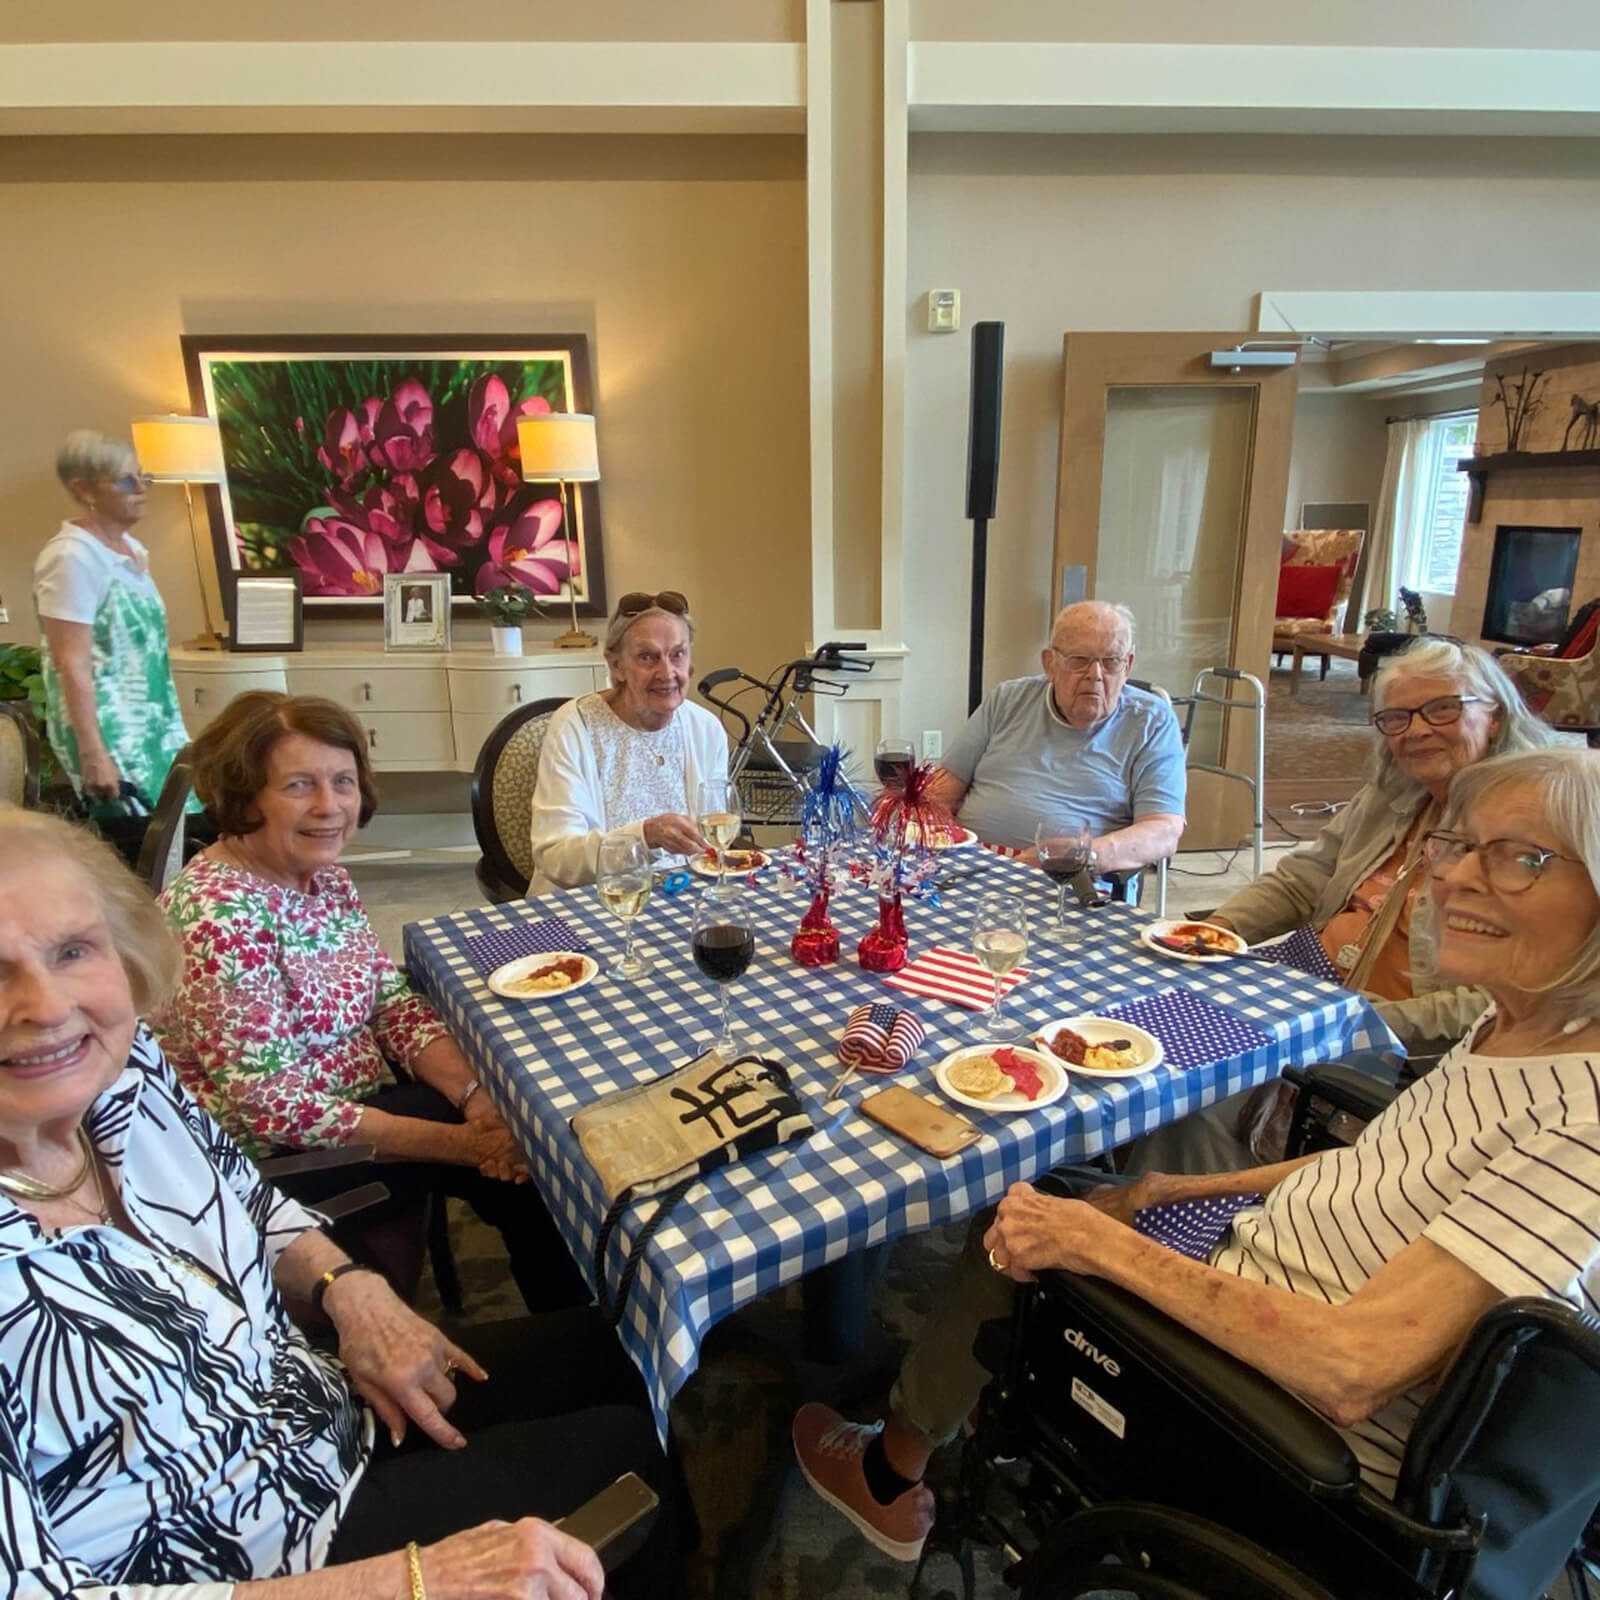 Seniors at The Waters on 50th in Minneapolis celebrating an American holiday with a festive table setting and a patriotic theme.